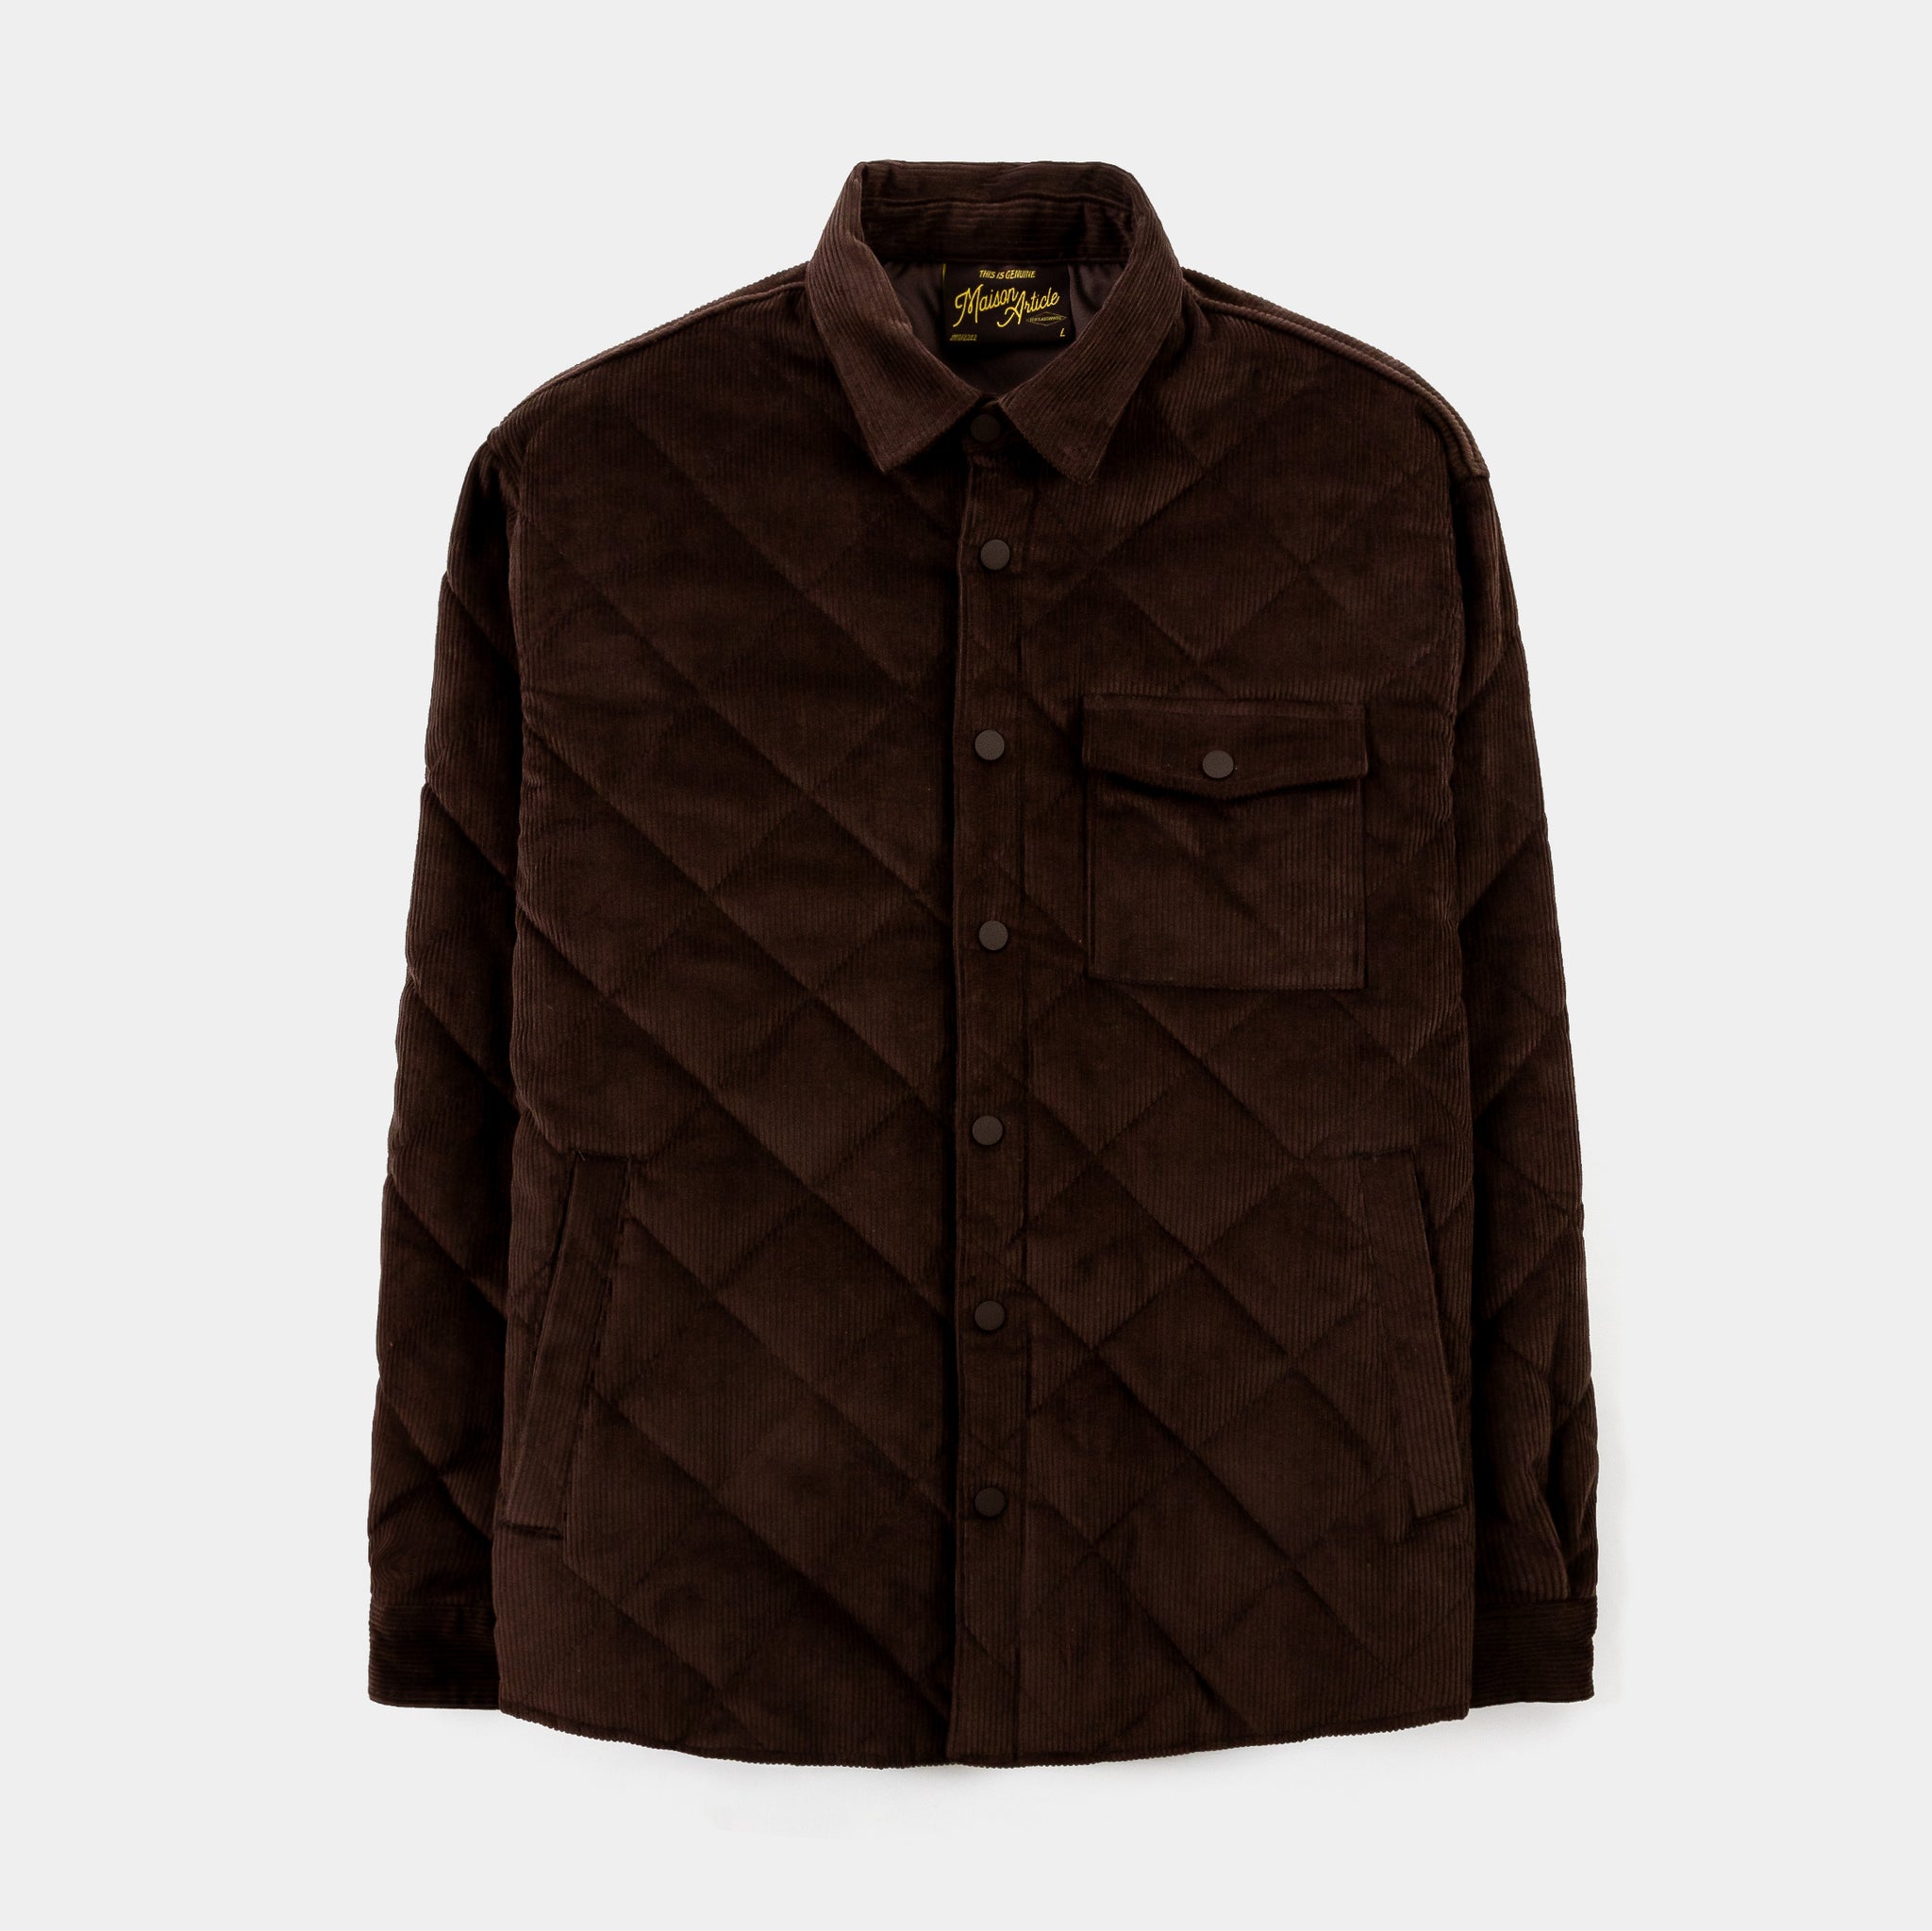 Sale on 100+ Fall Jackets offers and gifts | Stylight